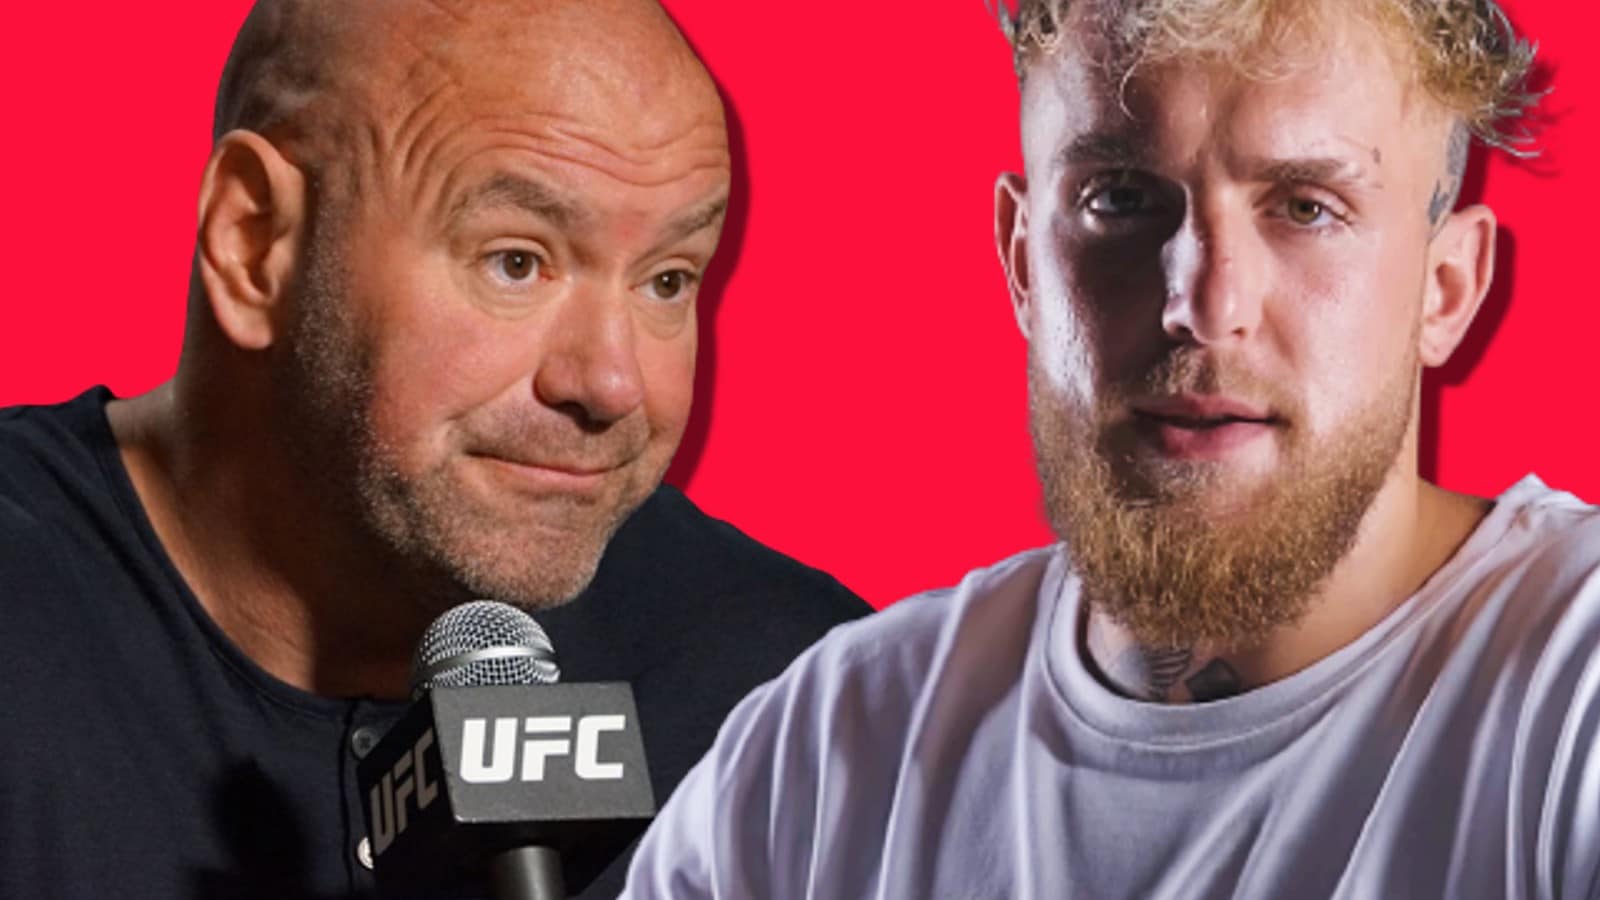 Jake Paul criticizes Dana White after UFC president tells media to 'stop asking' about him Dexerto